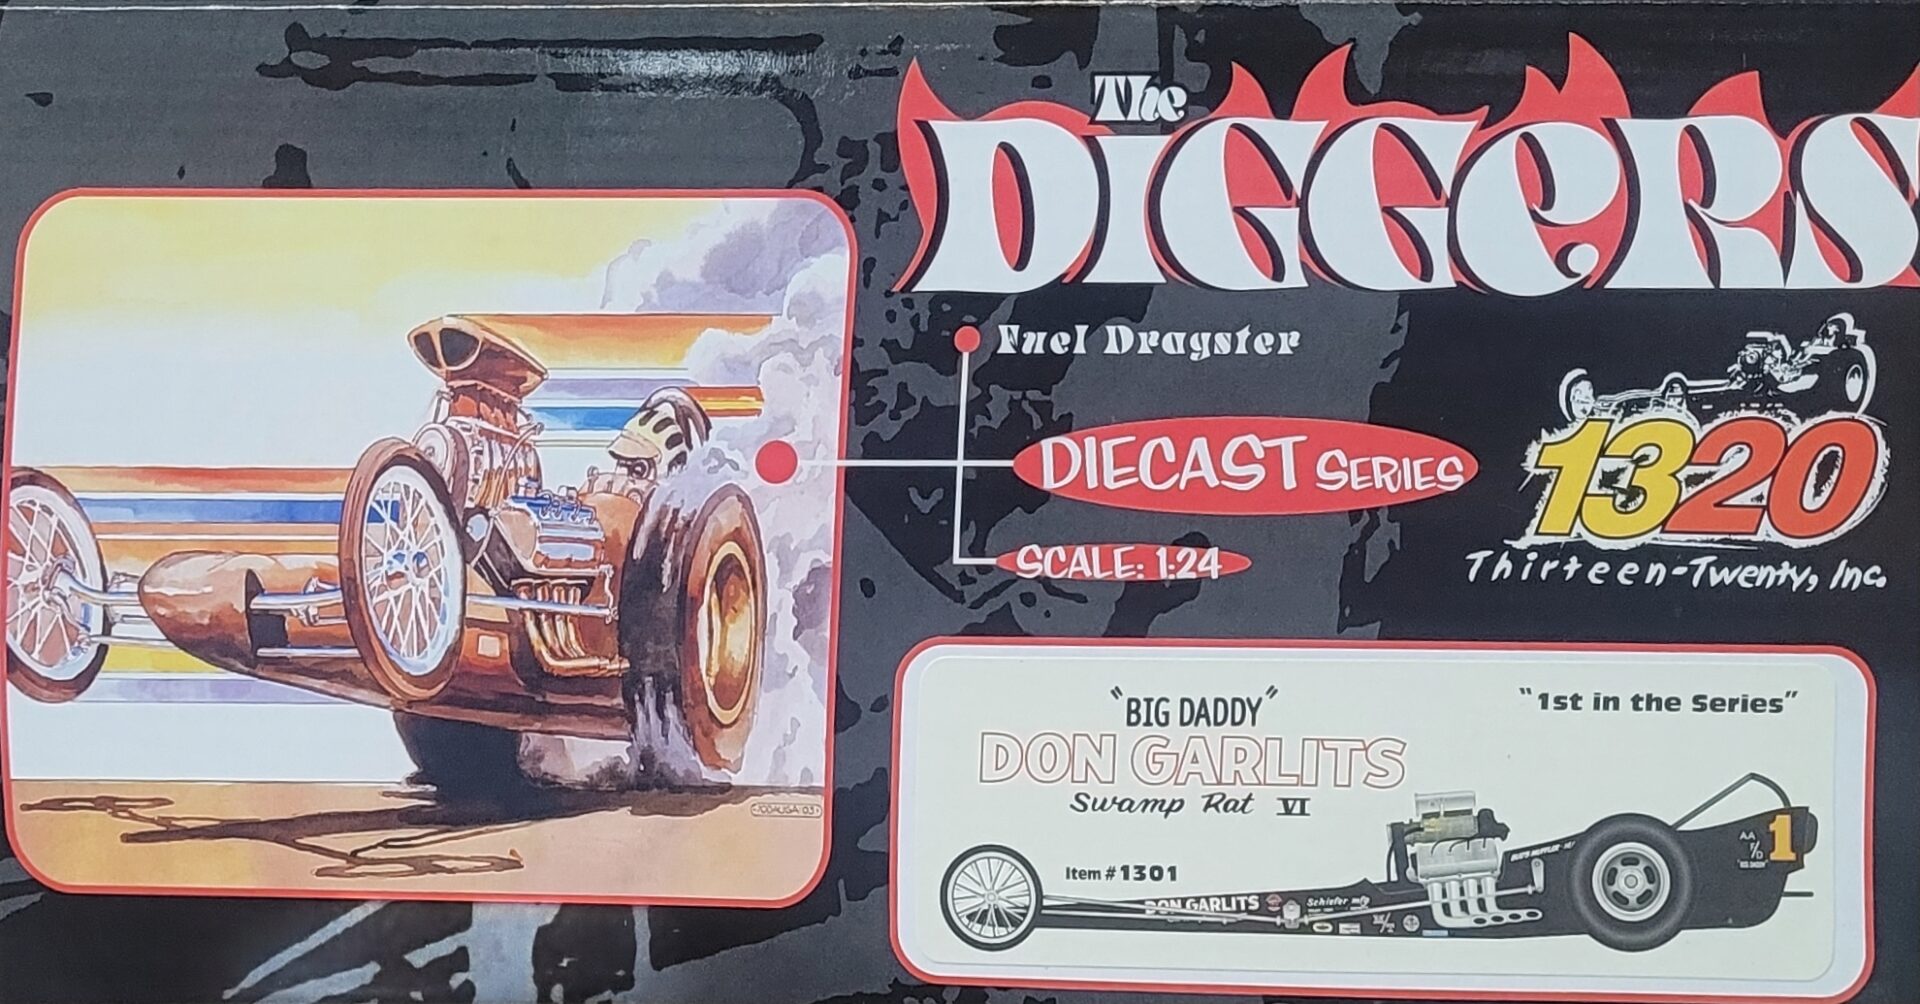 A poster on the diggers swamp Rat VI 1320